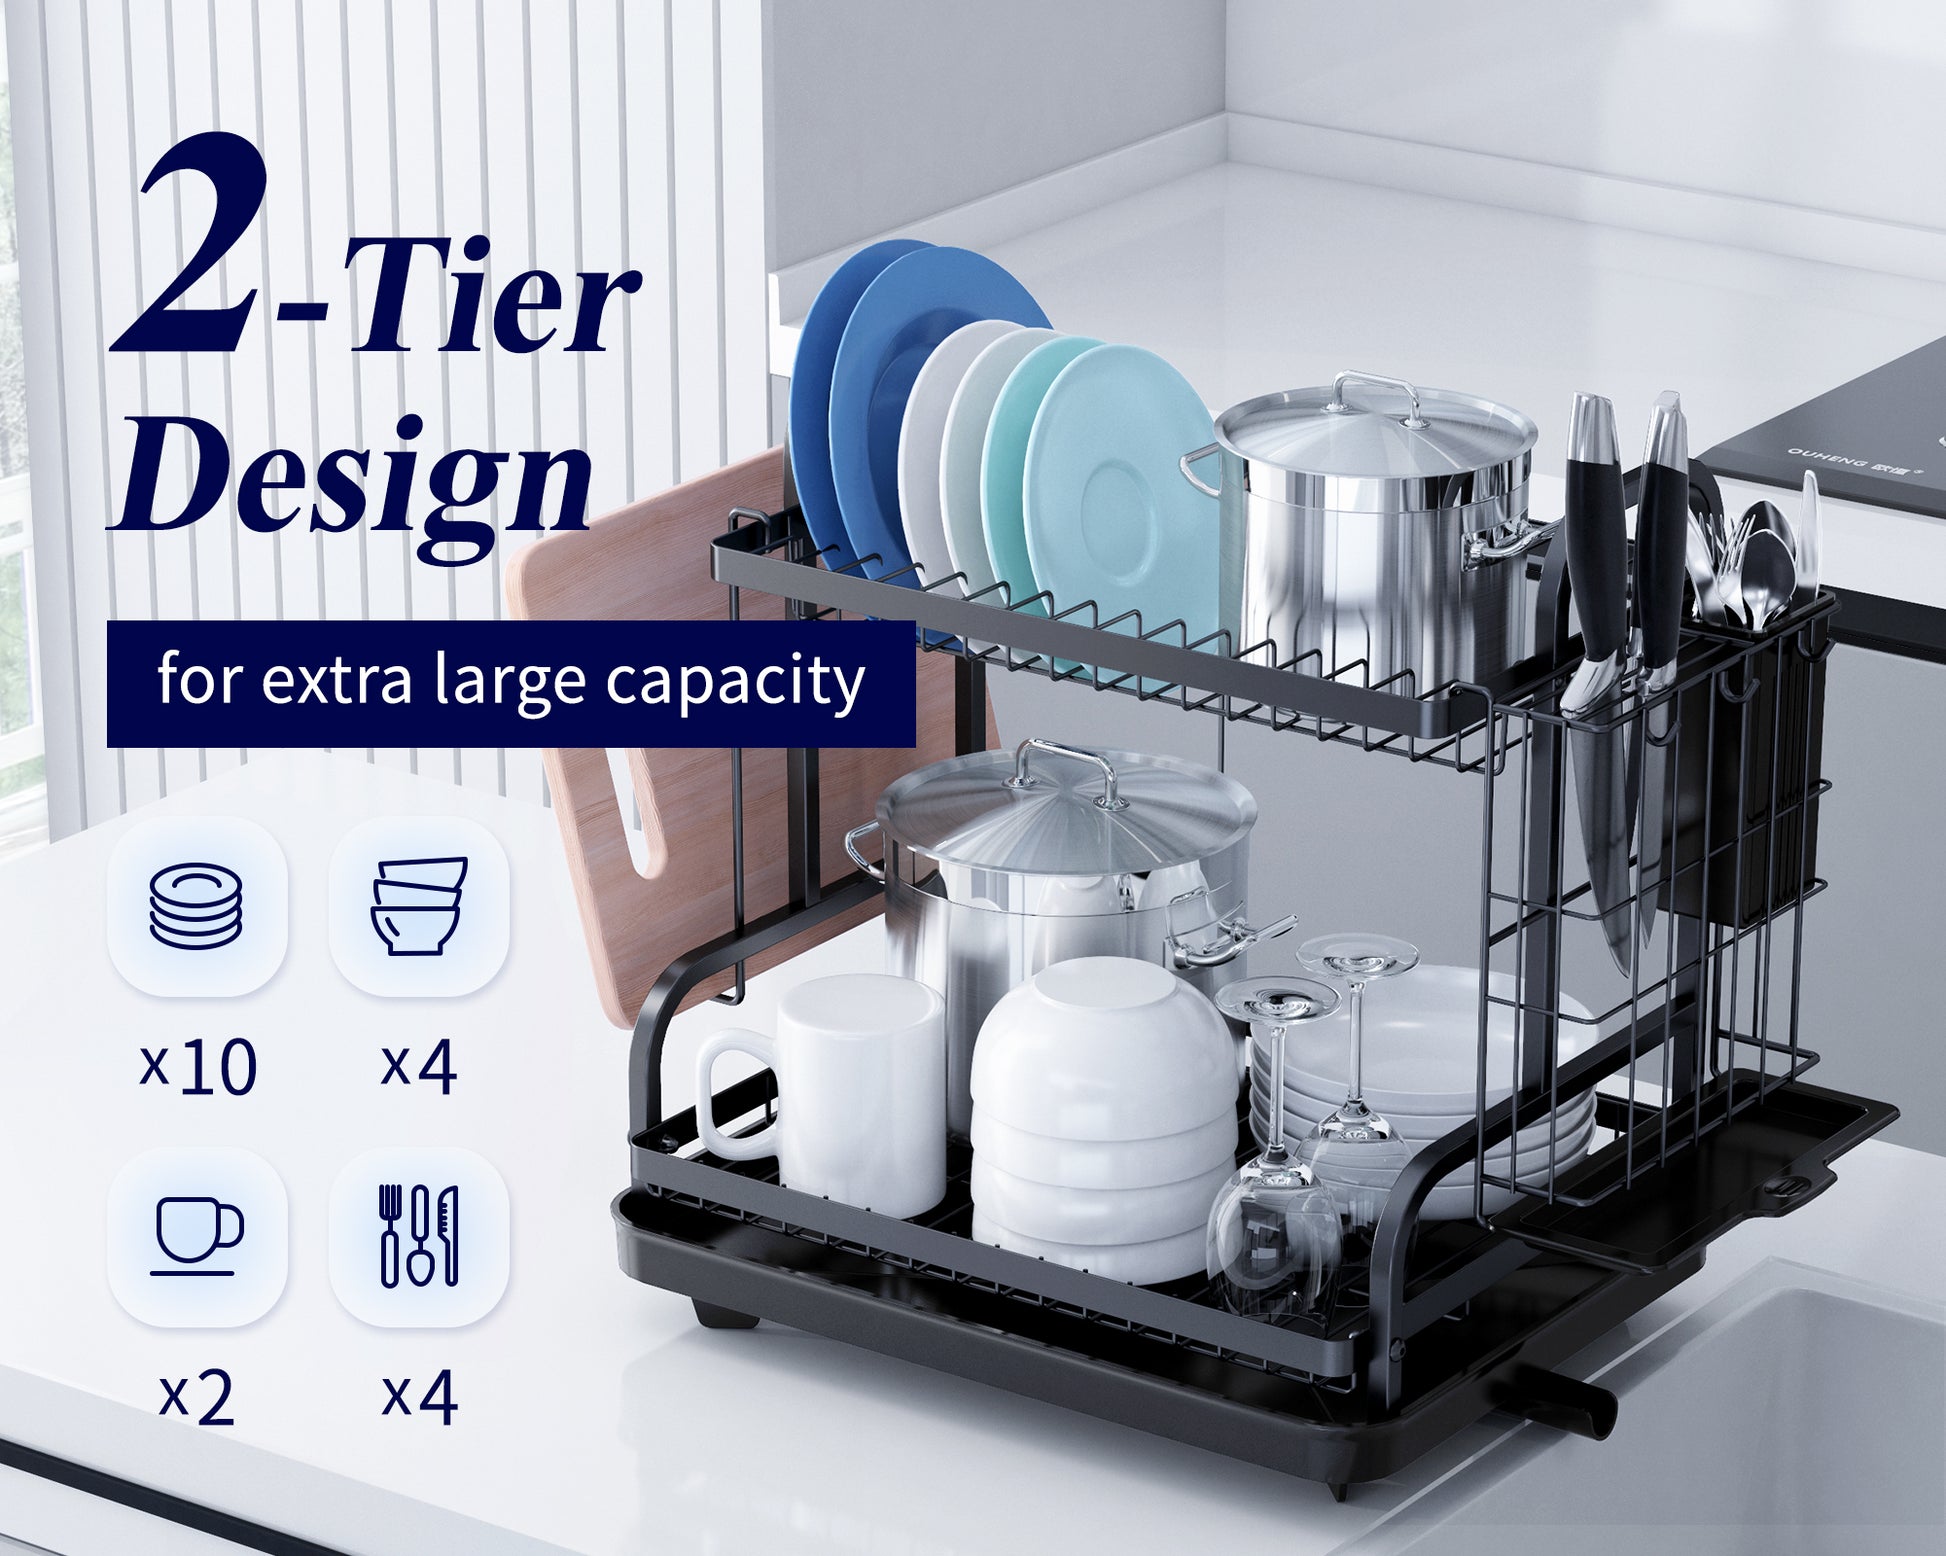 1pieces Kitsure Dish Drying Rack, Large Kitchen Dish Rack and Drainboard  Set with Easy Installation, Durable Stainless Steel Dish Rack for Counter